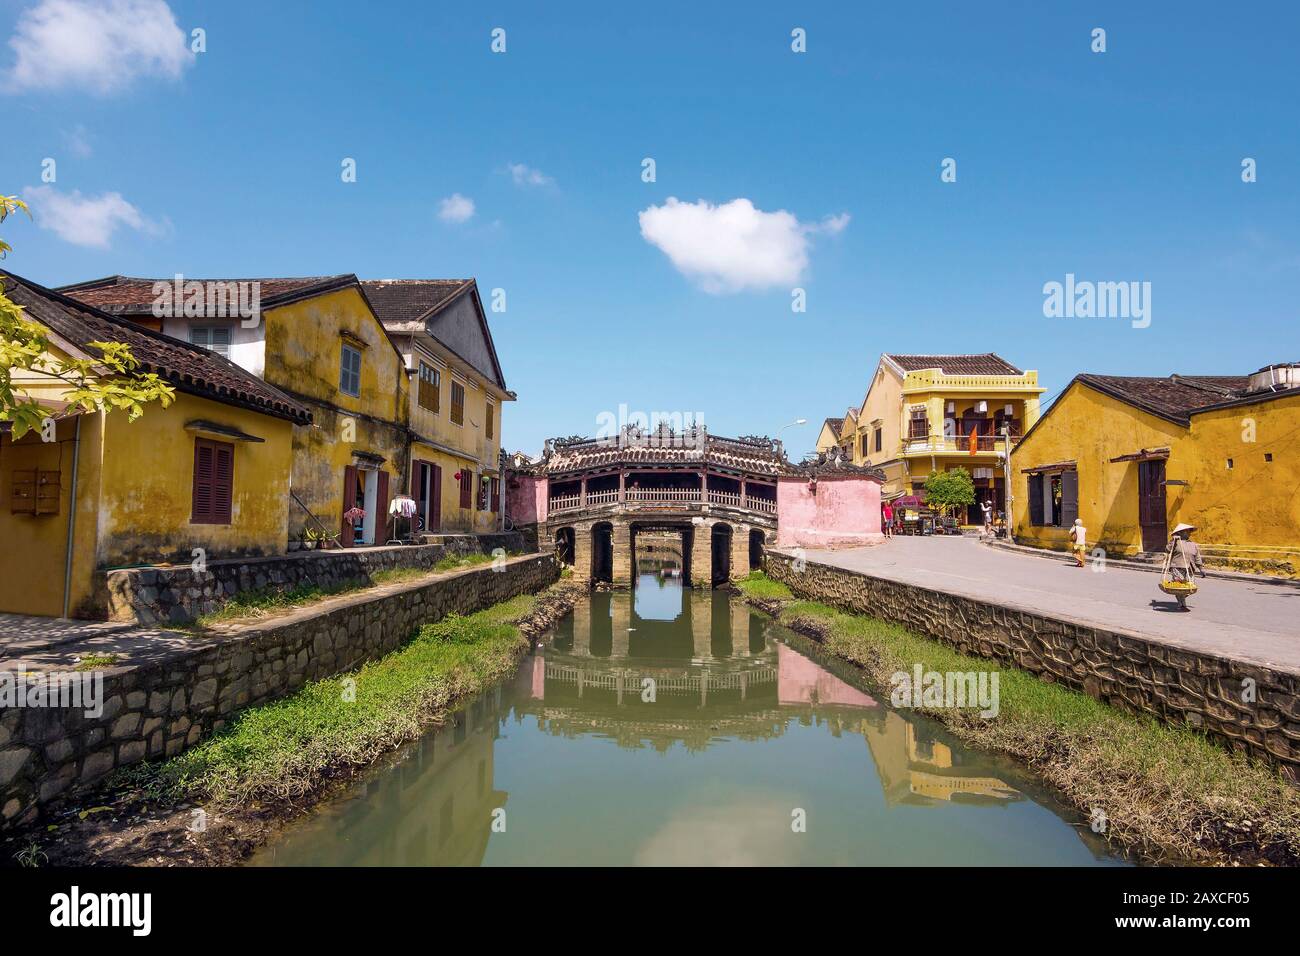 Japanese Covered Bridge in Hoi An Ancient Town, Vietnam. Stock Photo